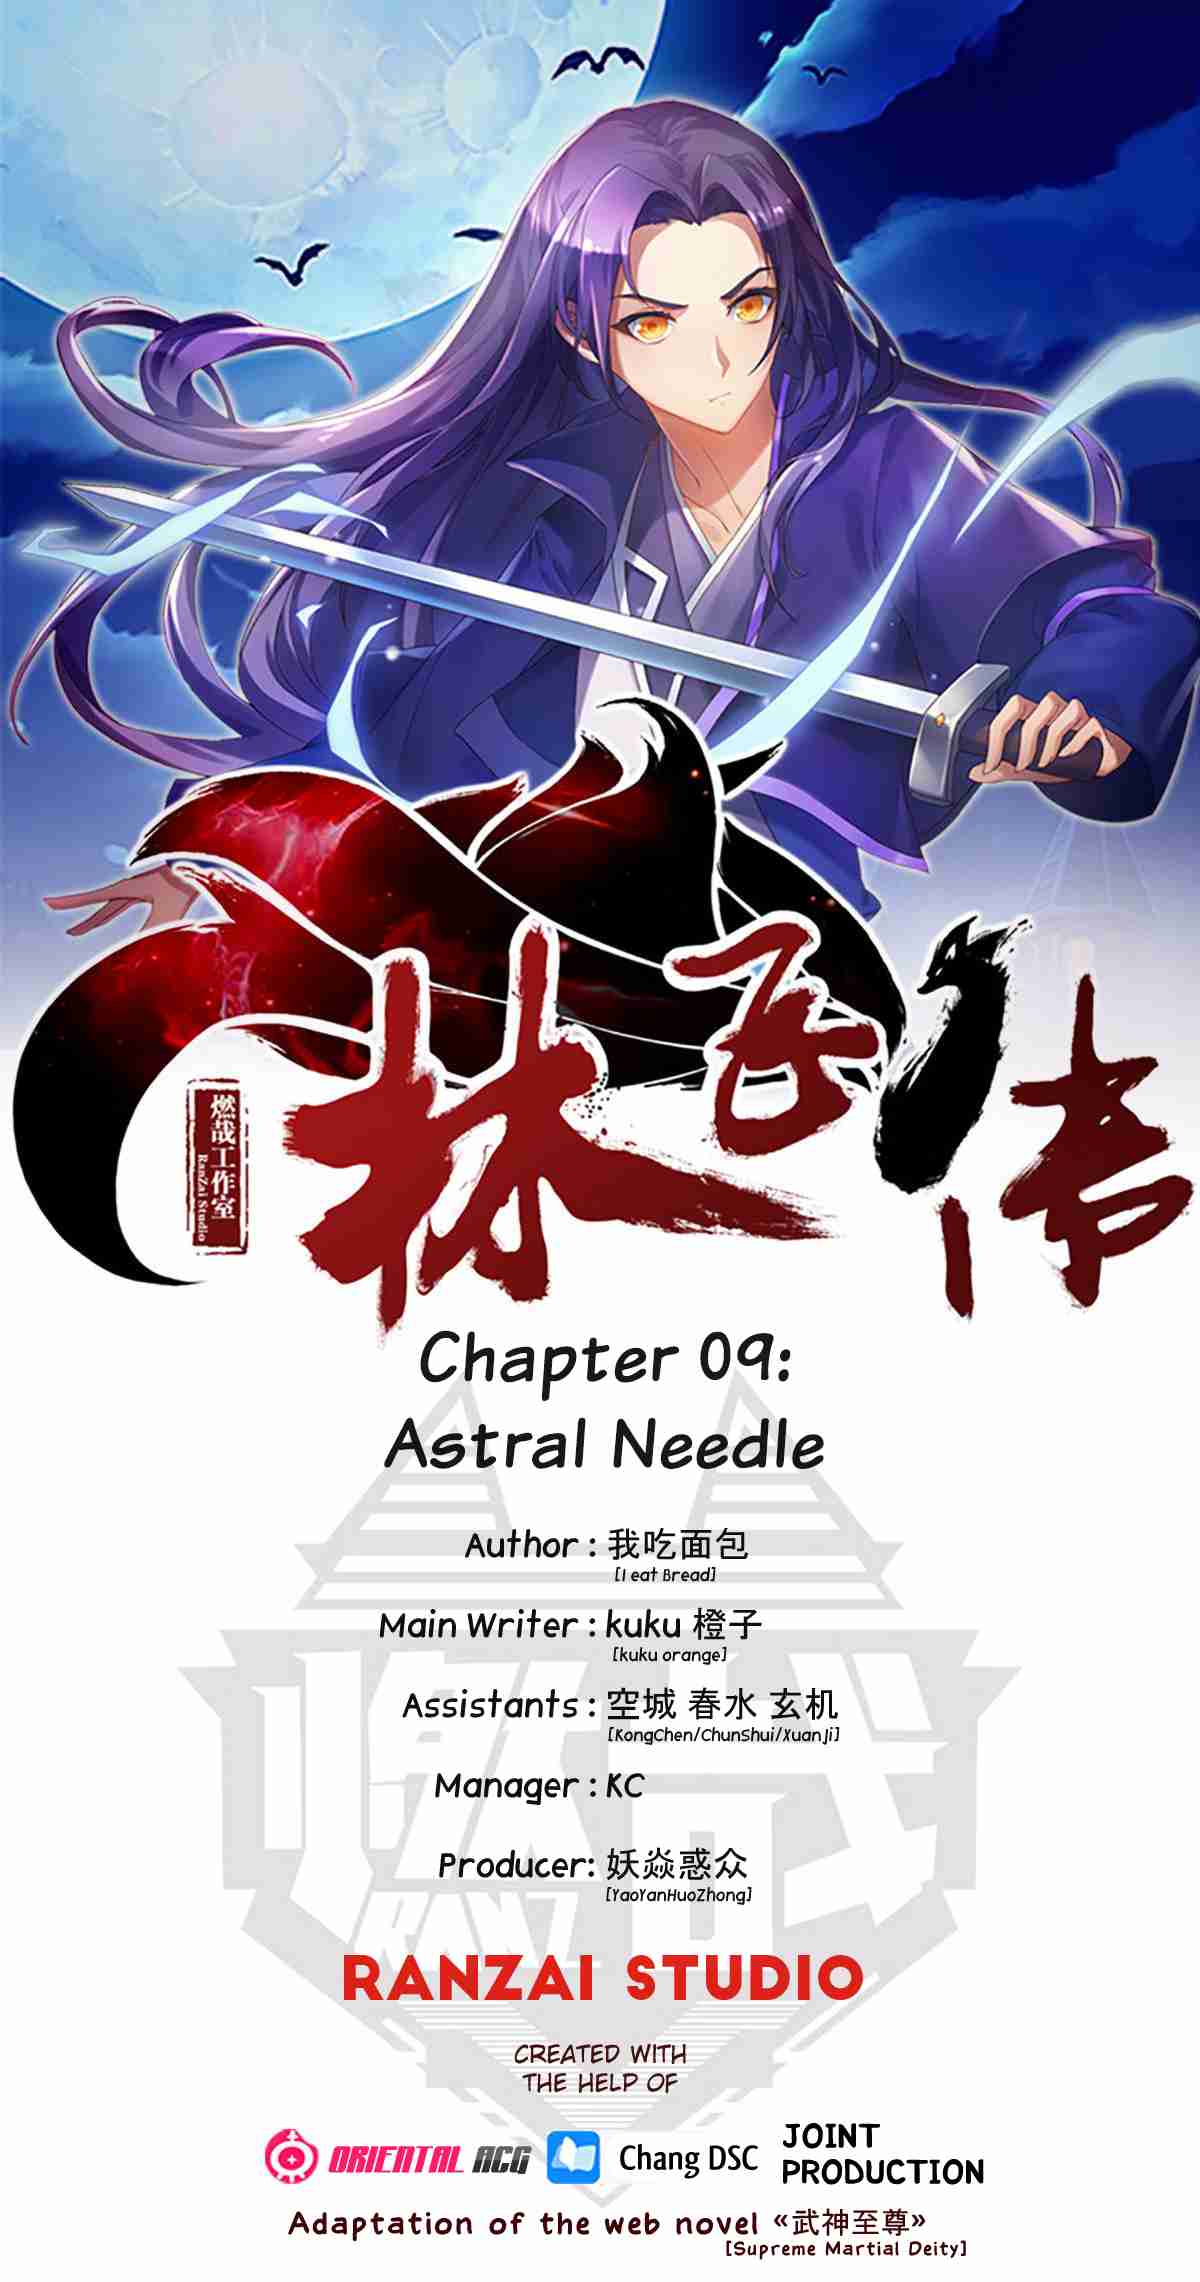 Lin Fei Chronicles Ch. 9 Astral Needle